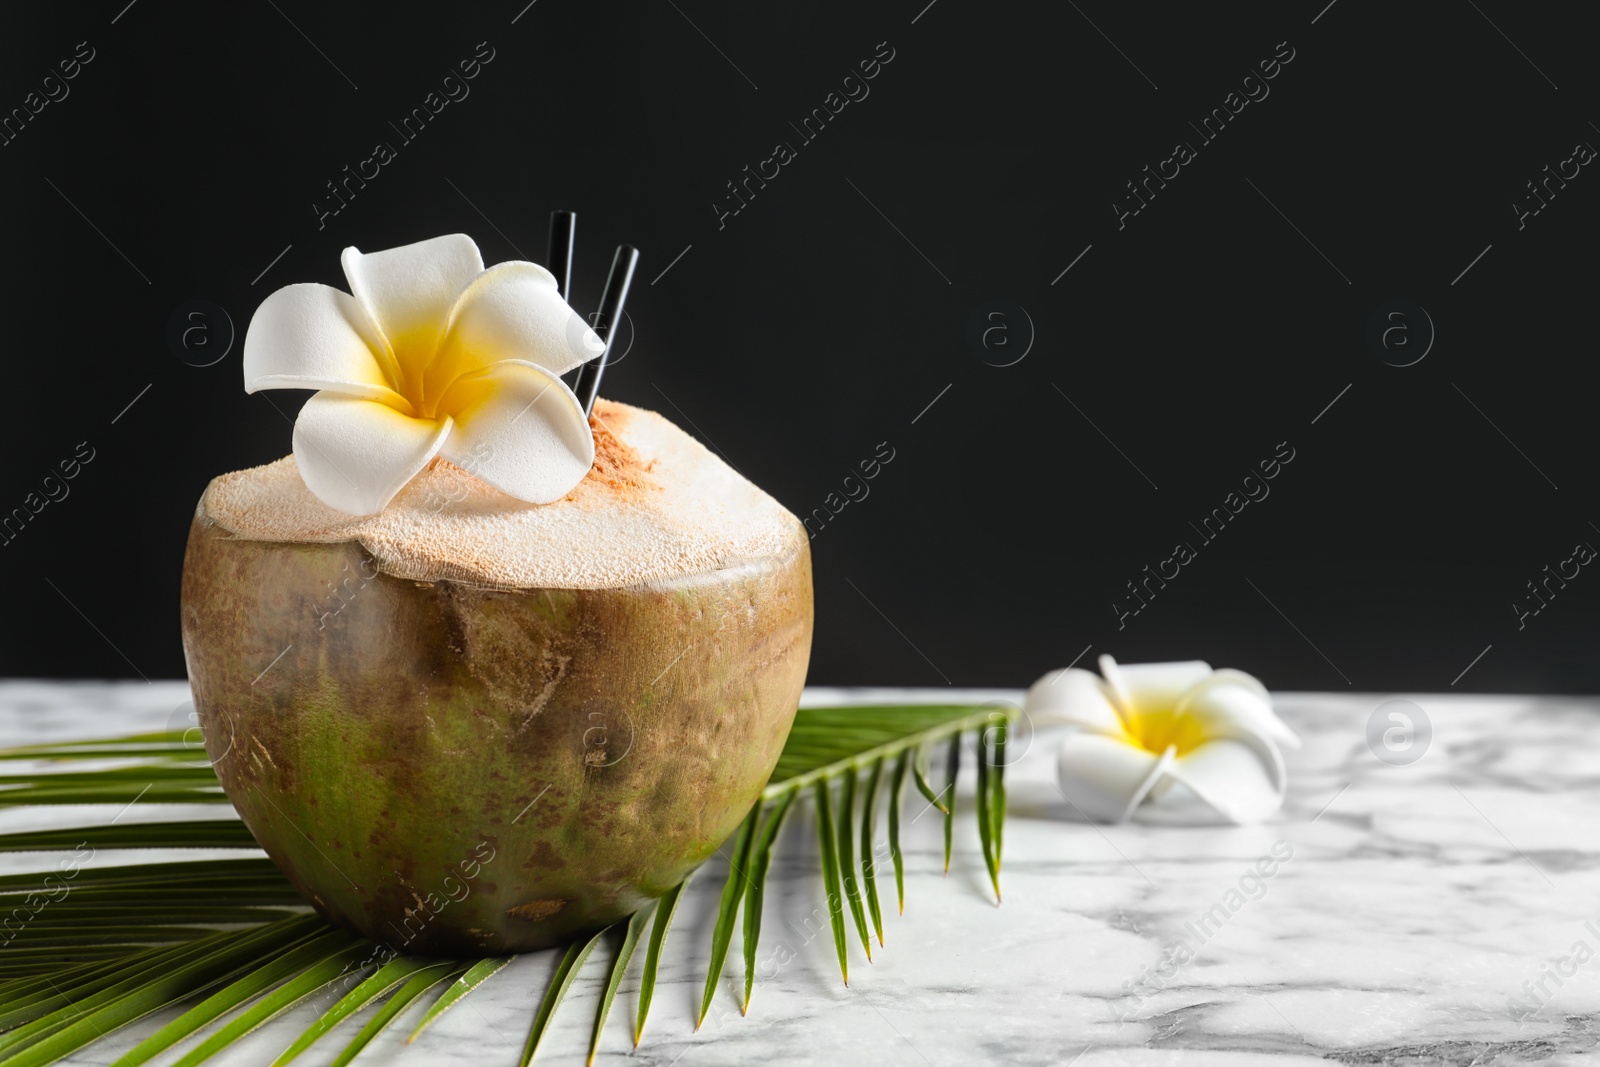 Photo of Fresh green coconut on table against dark background